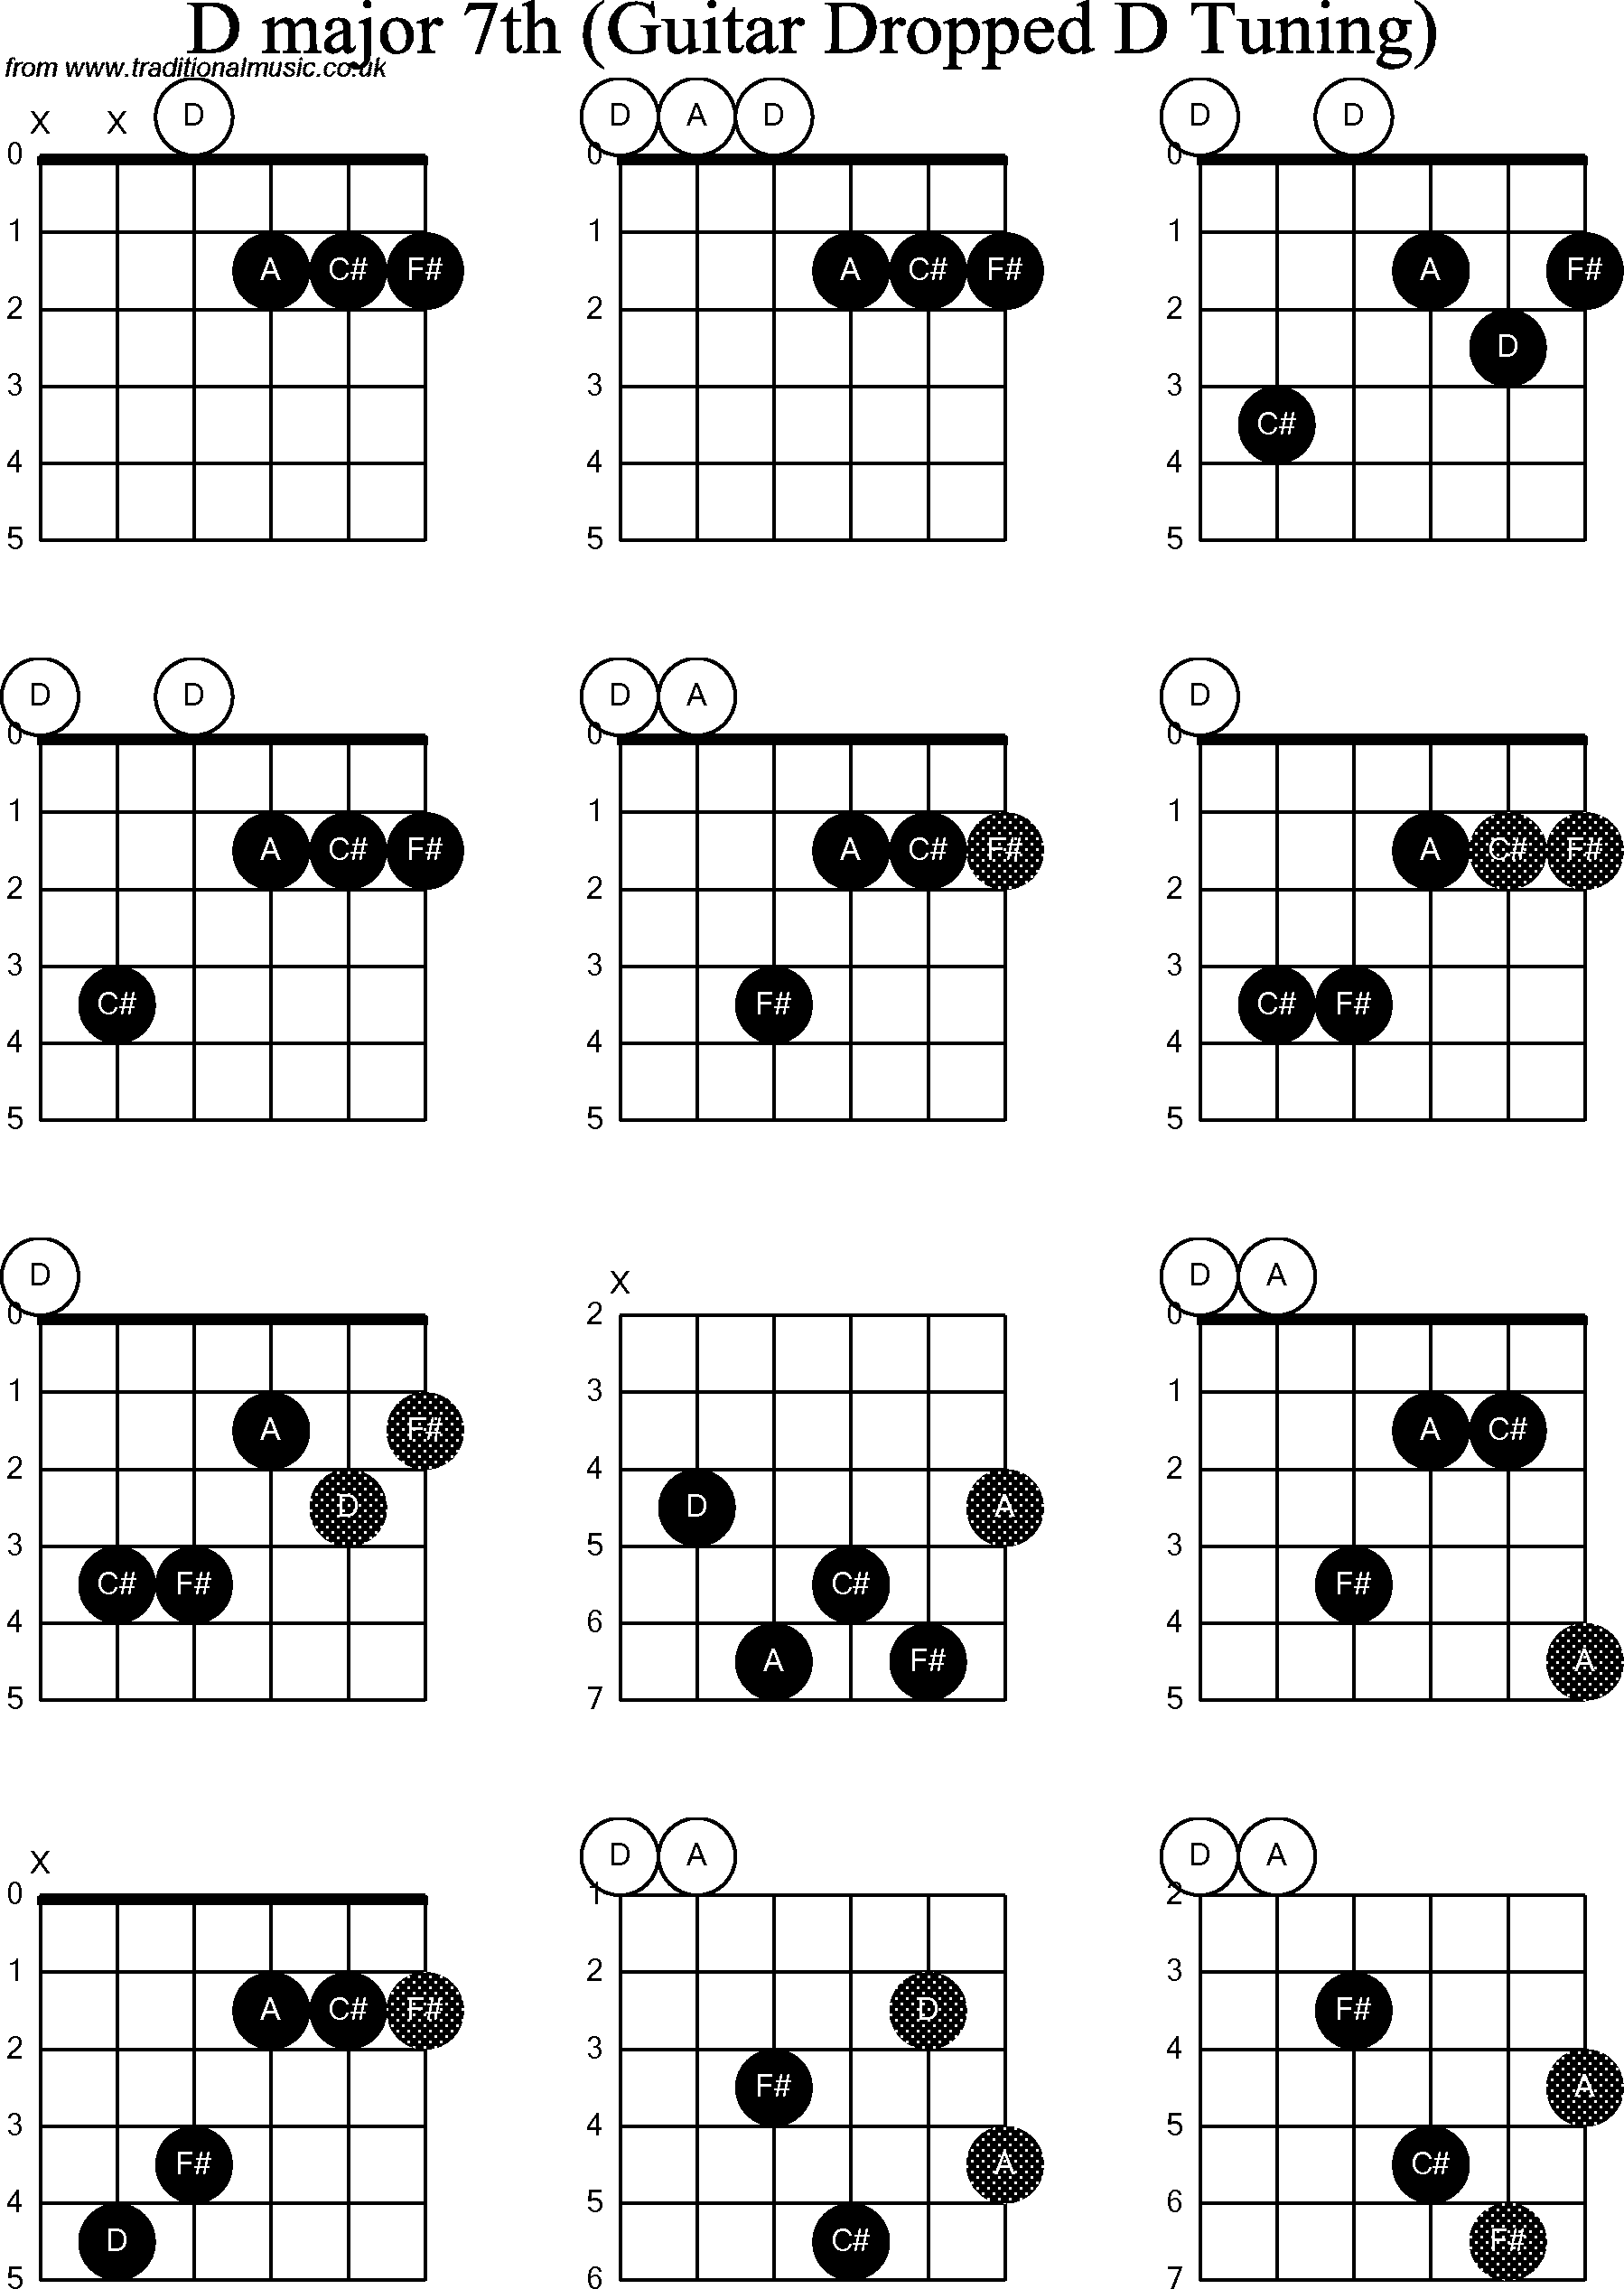 Chord diagrams for dropped D Guitar(DADGBE), D Major7th